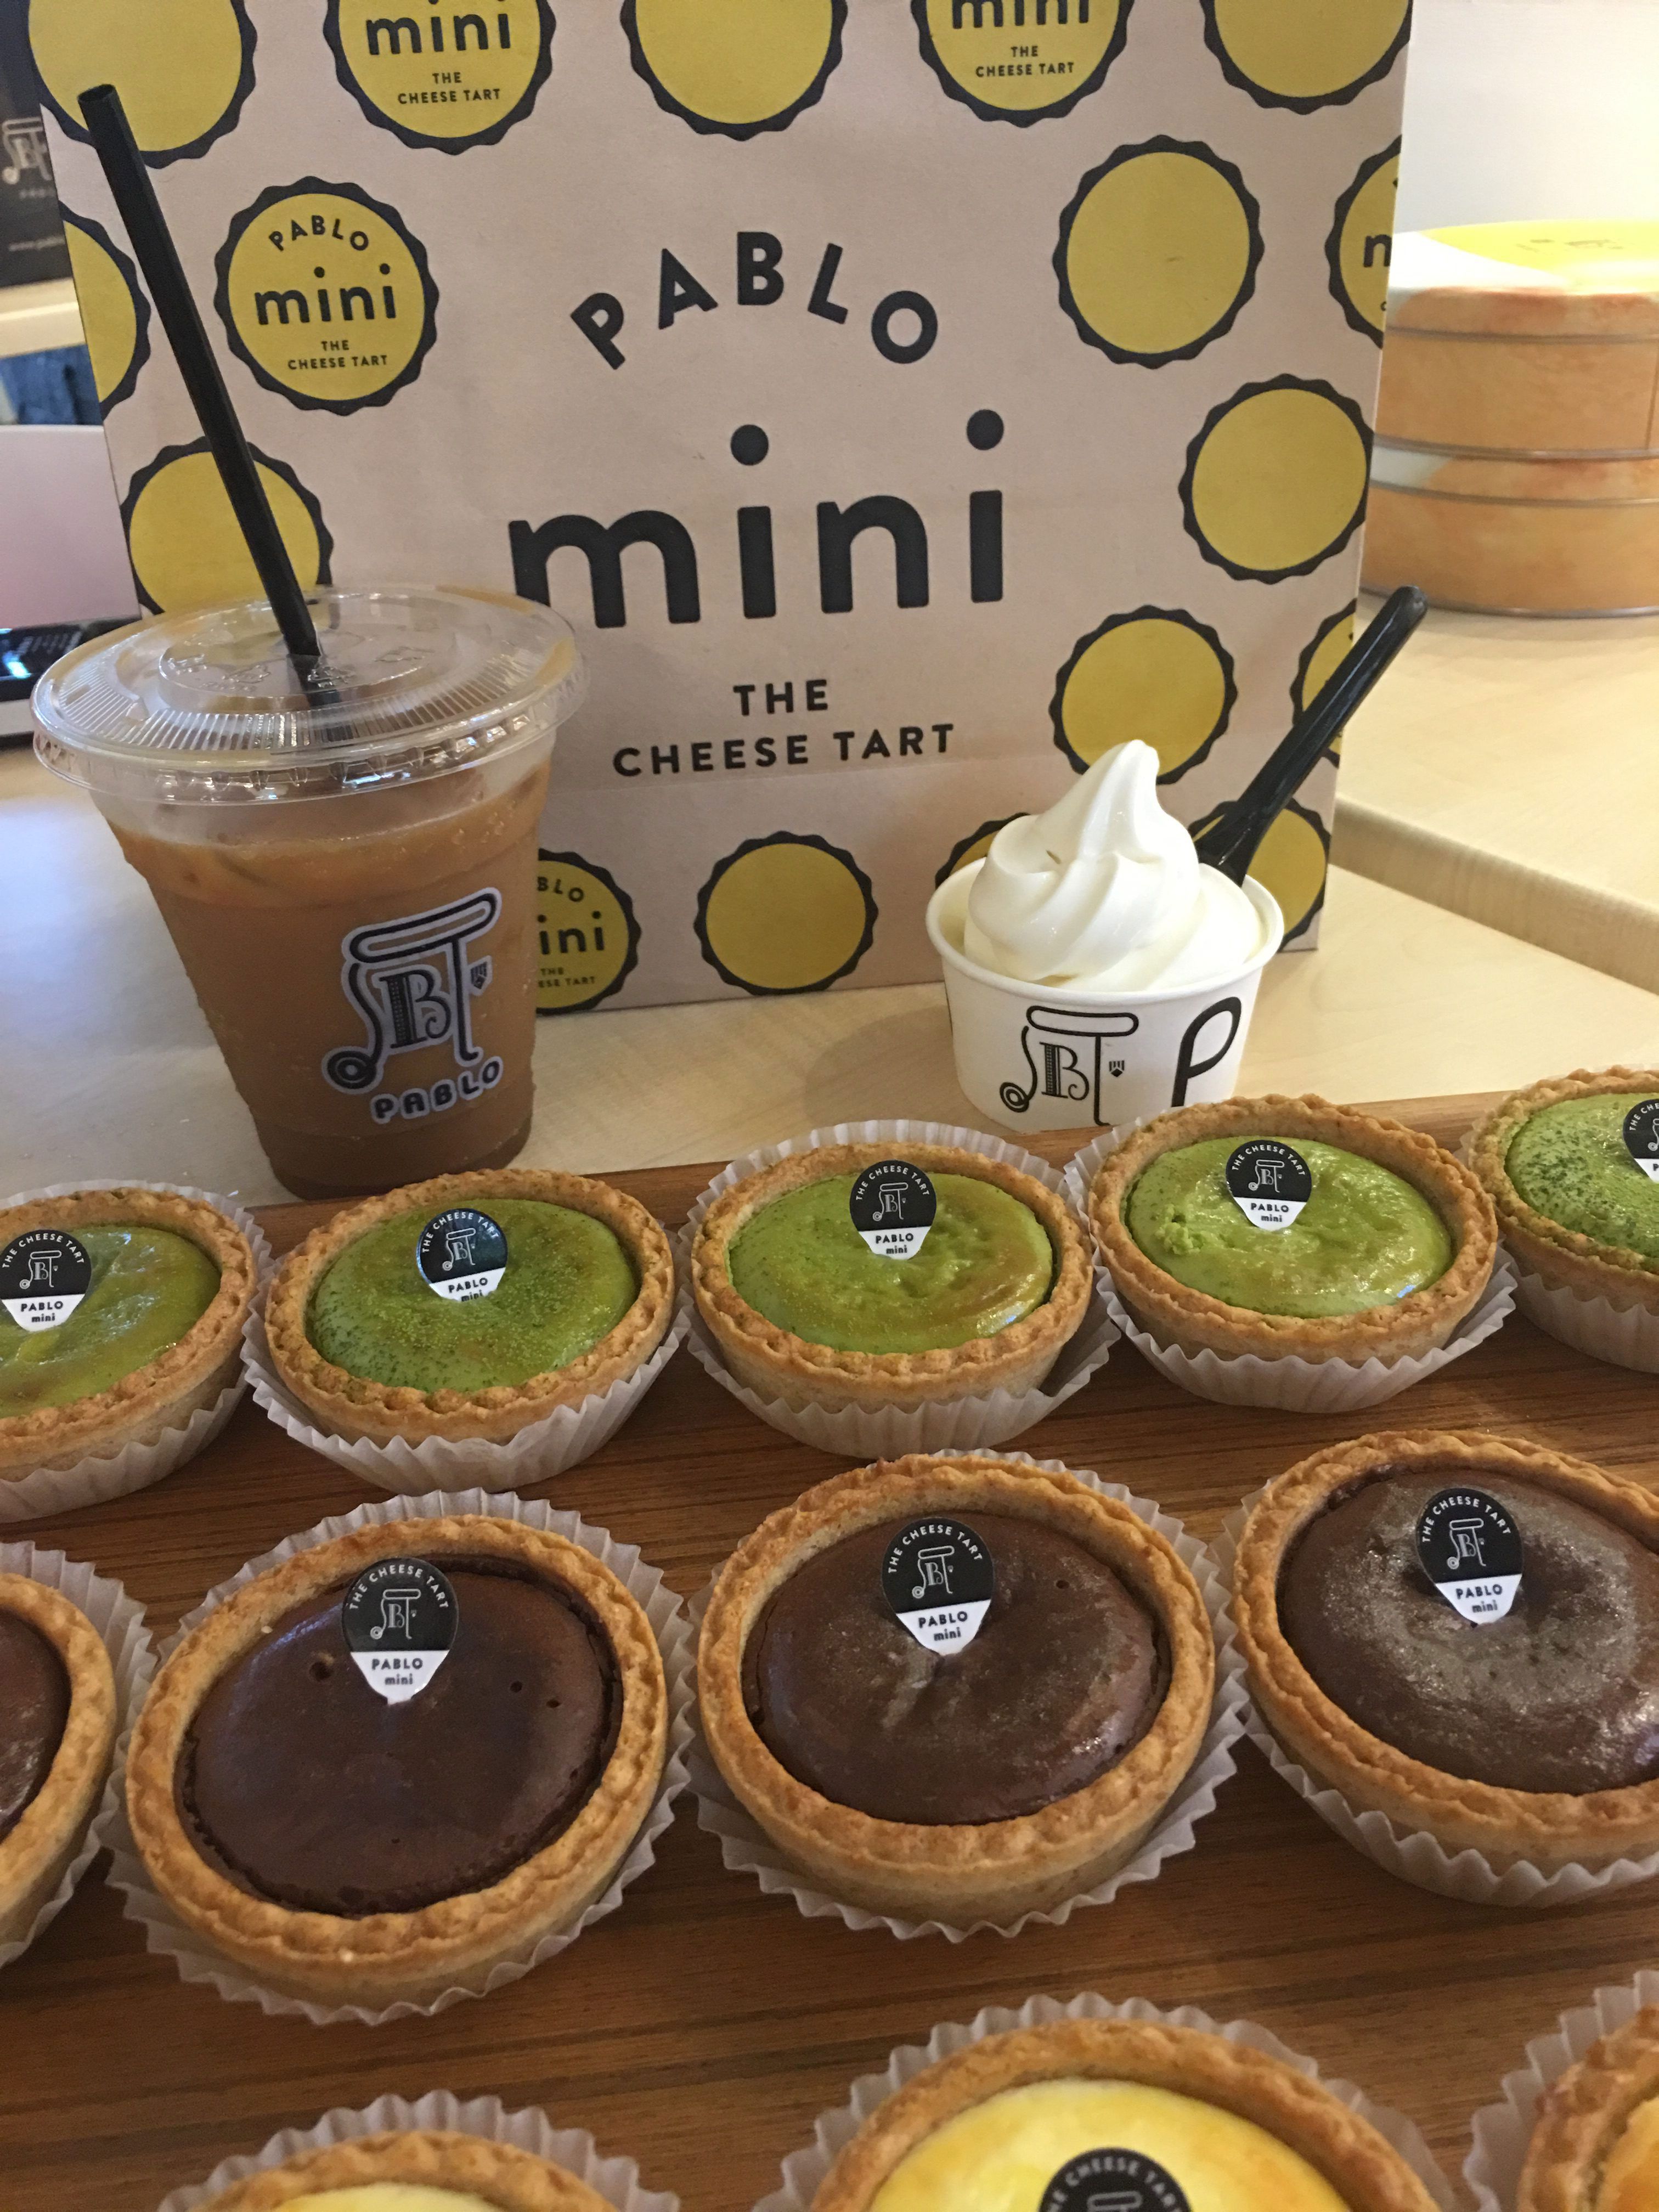 iced coffee, soft serve & some matcha, chocolate and a peek of the original cheese tarts